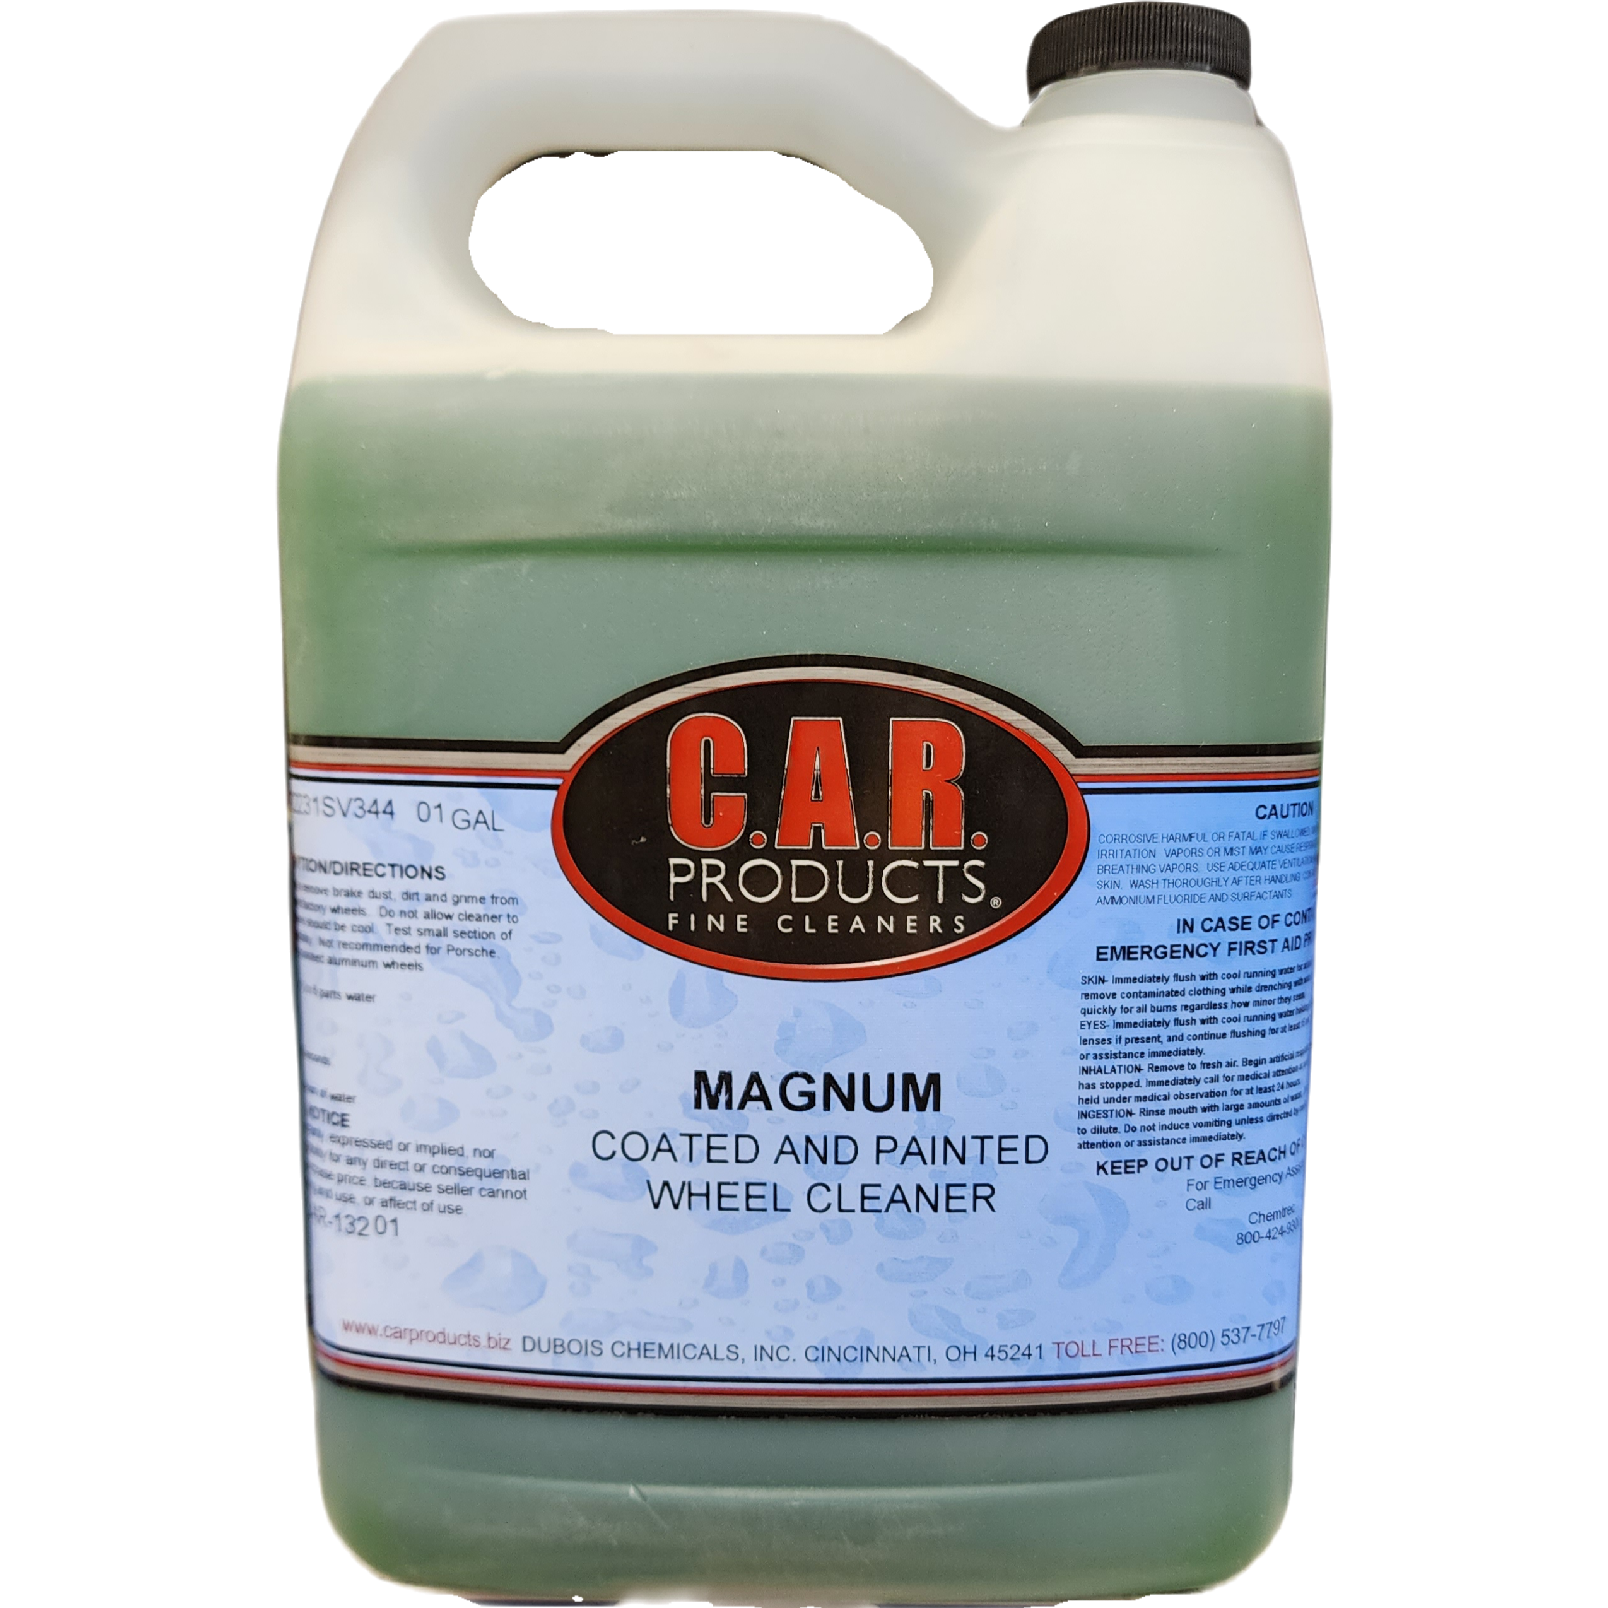 XCP CAR-13201 CAR Products Magnum Coated & Painted Wheel Cleaner (1 gal)